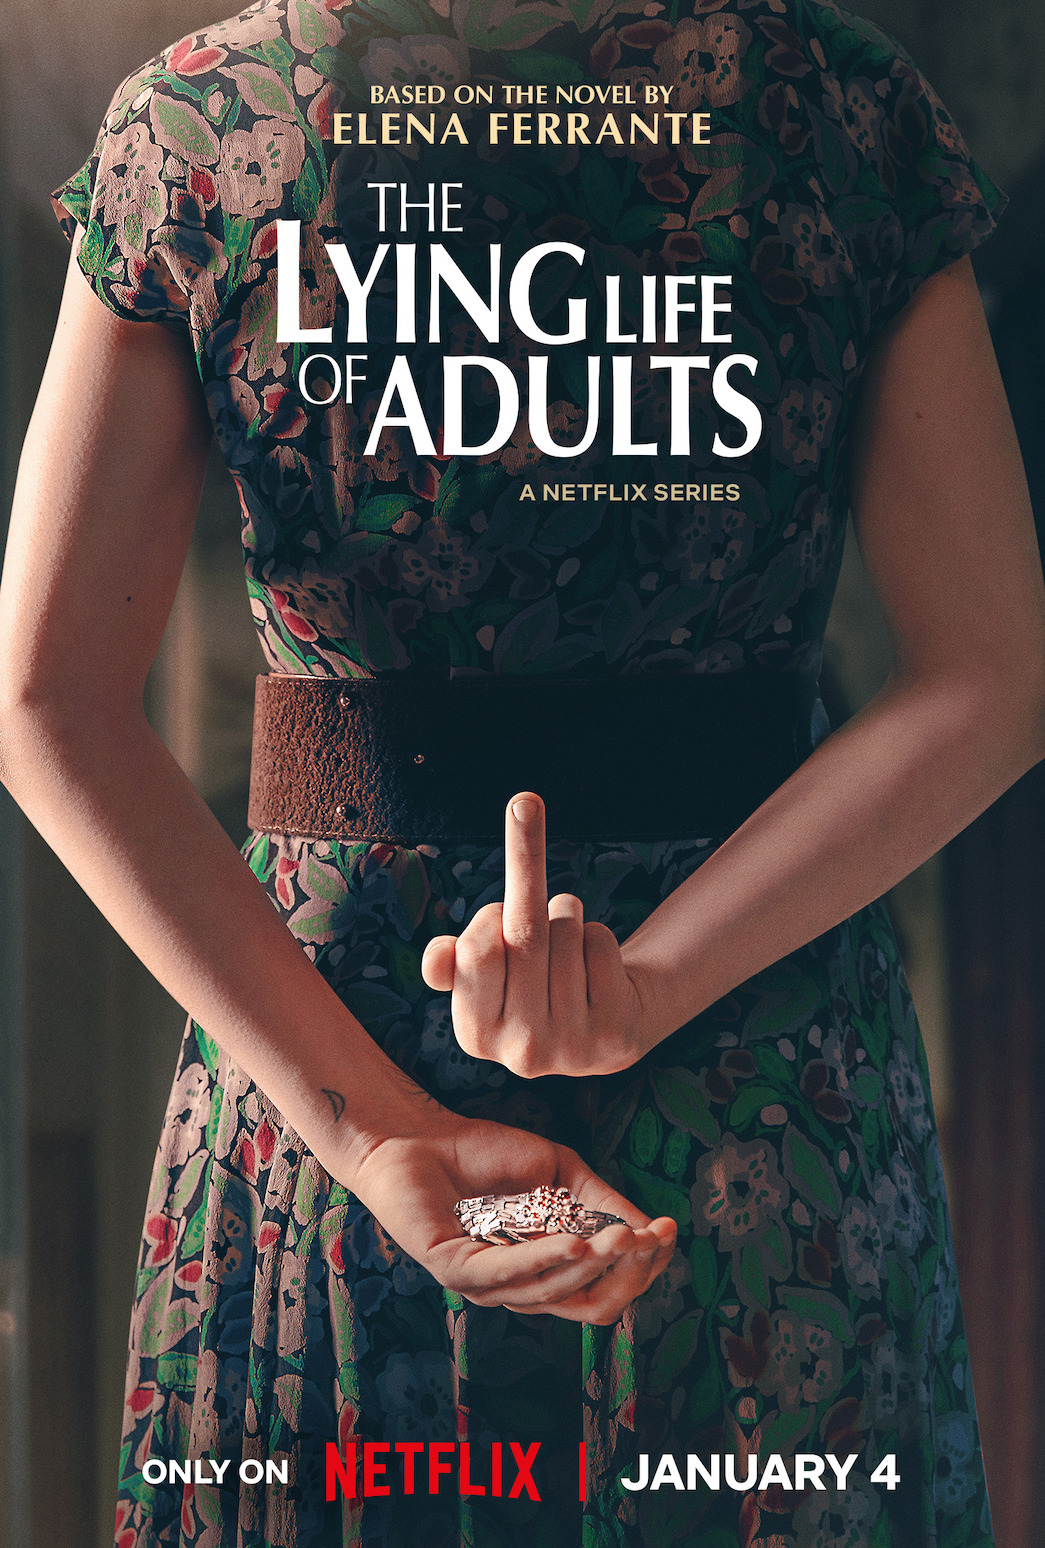 The Lying Life of Adults: When will it premiere on Netflix? 